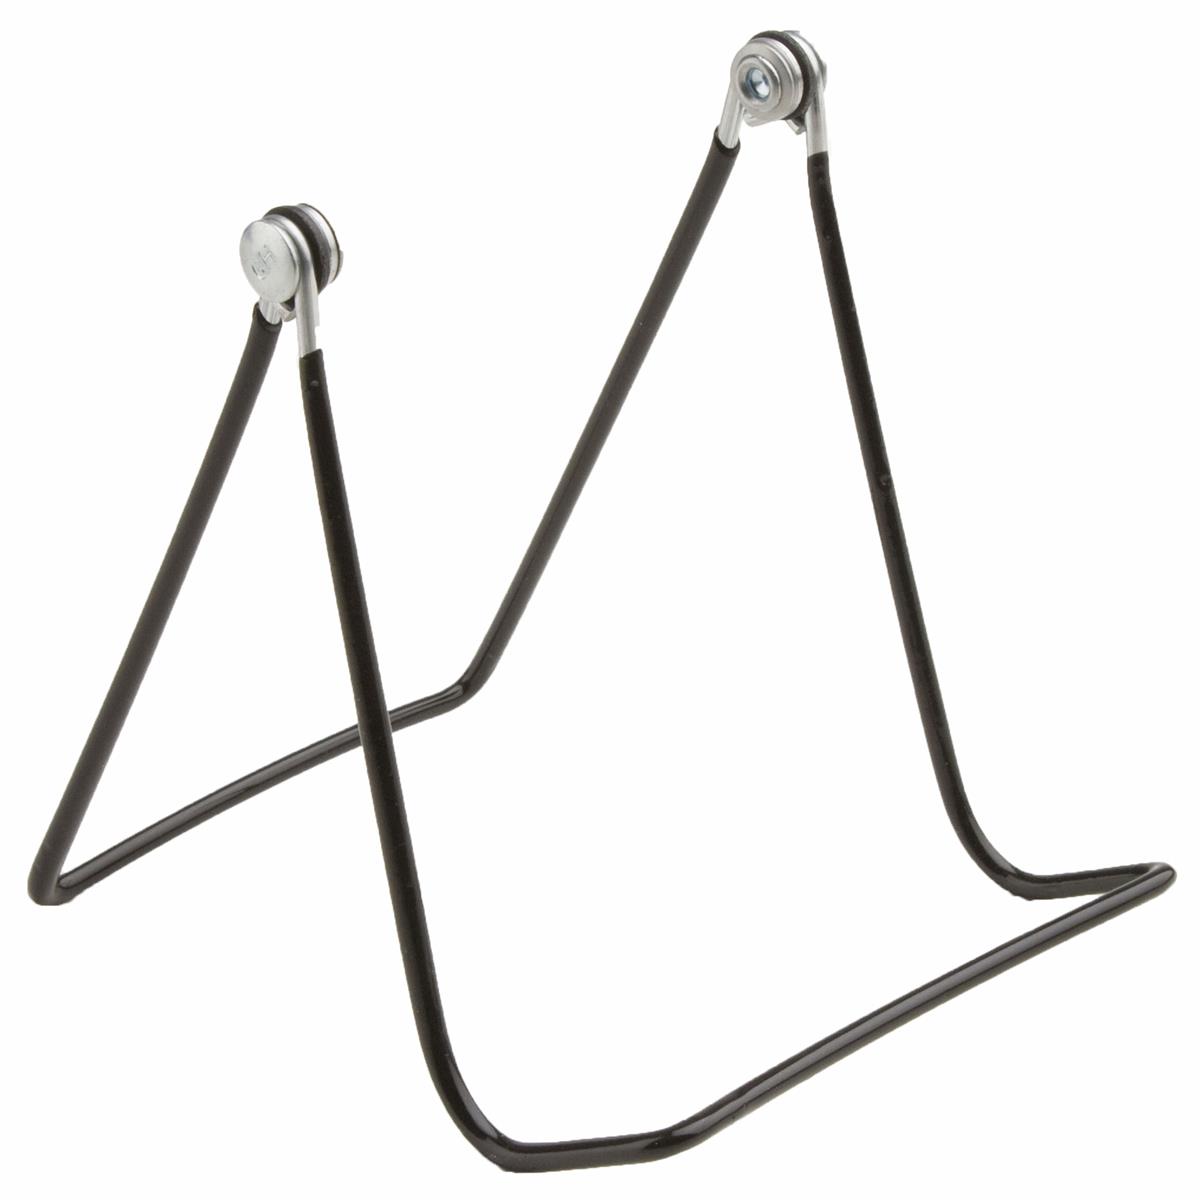 Wire Easel is a Foldable and Adjustable Display Stand.